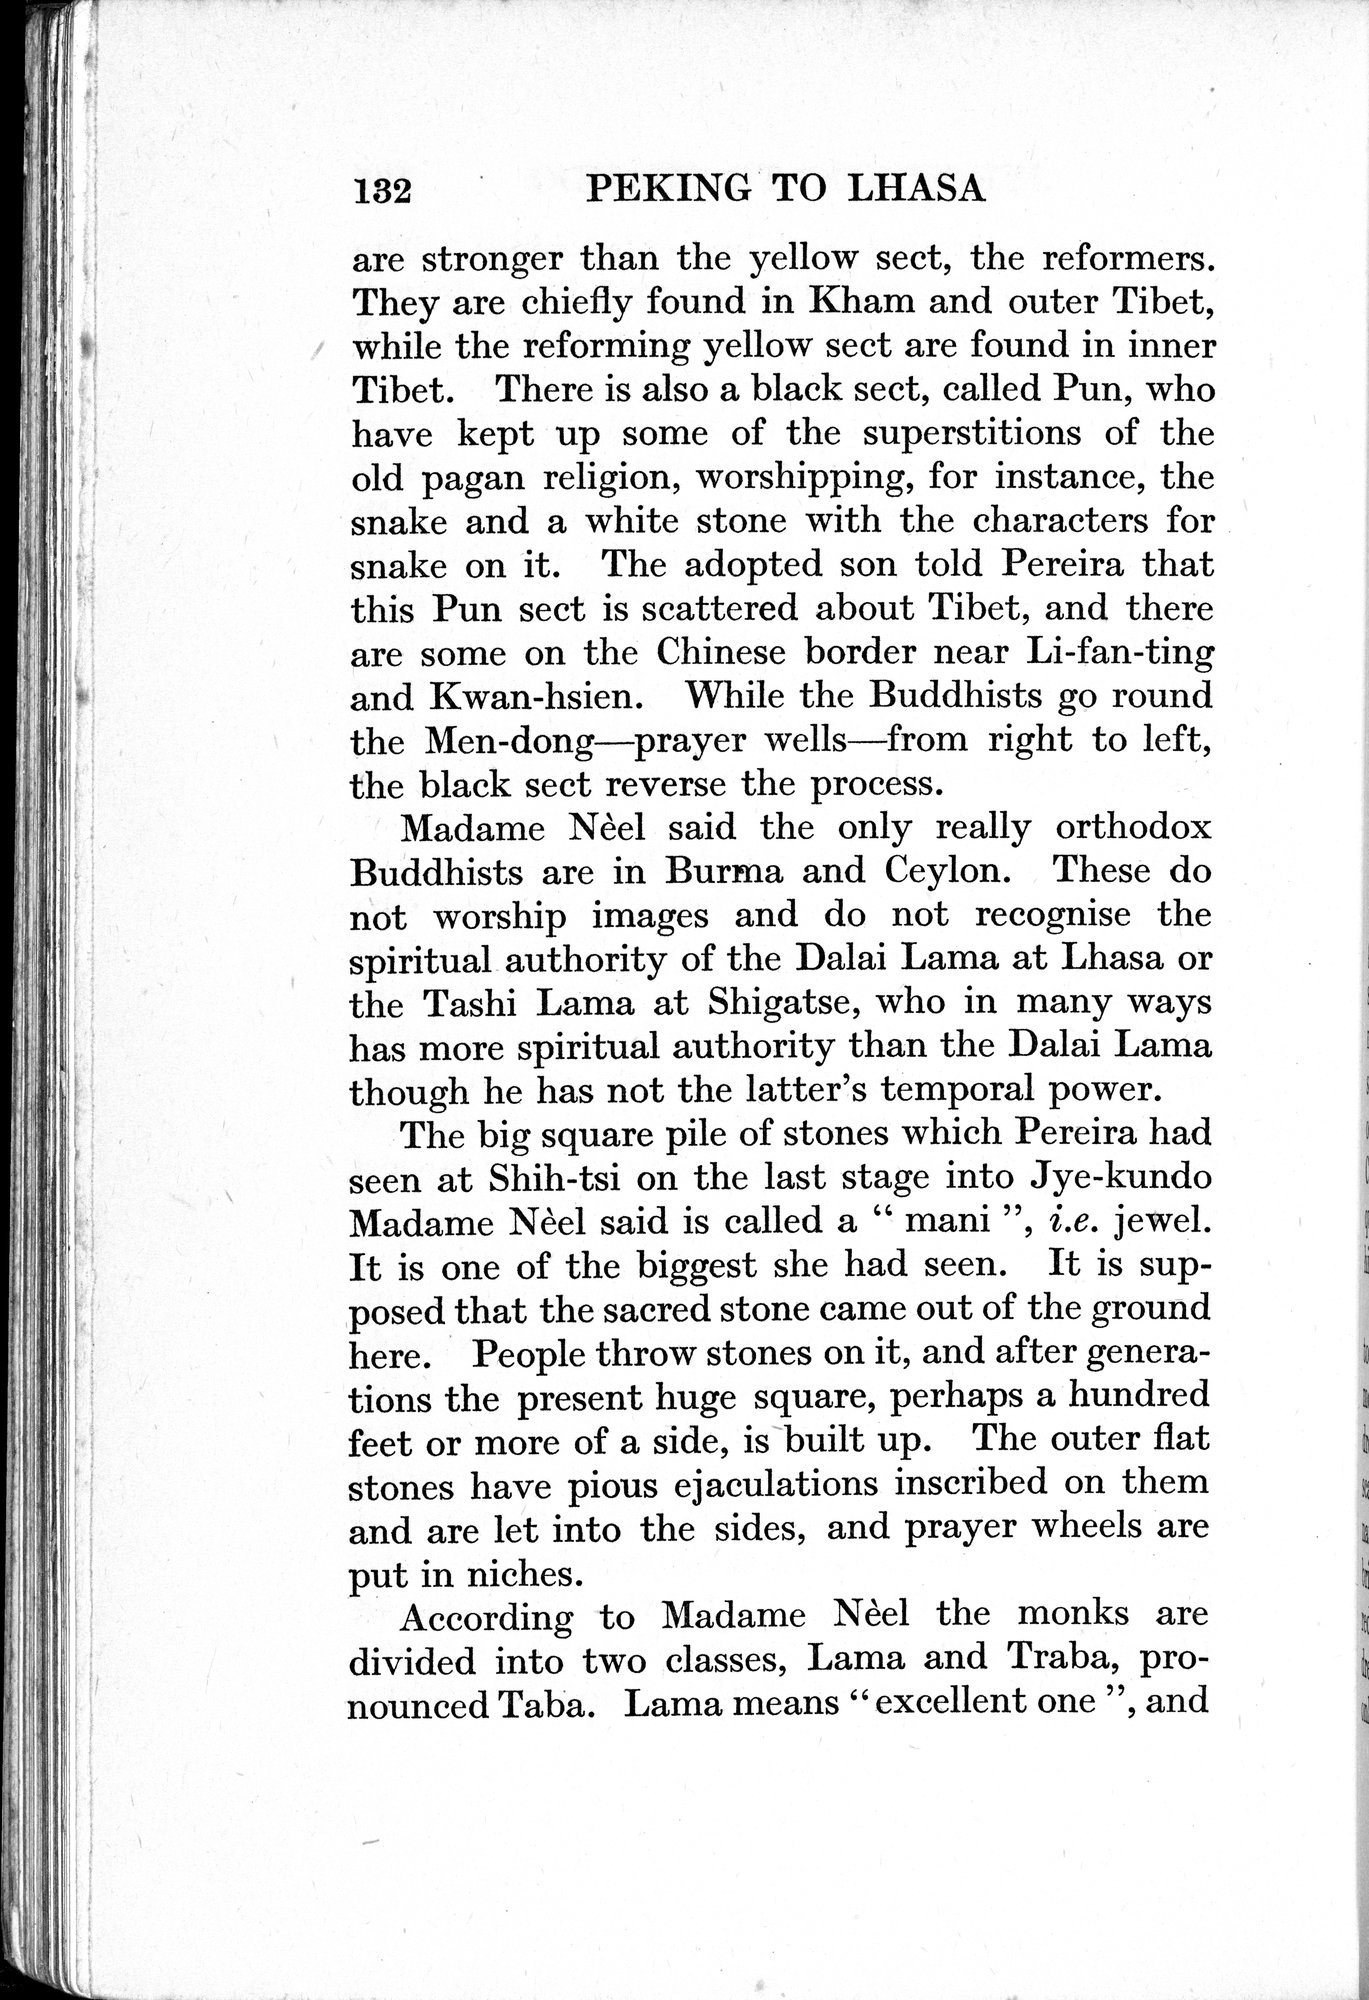 Peking to Lhasa : vol.1 / Page 178 (Grayscale High Resolution Image)